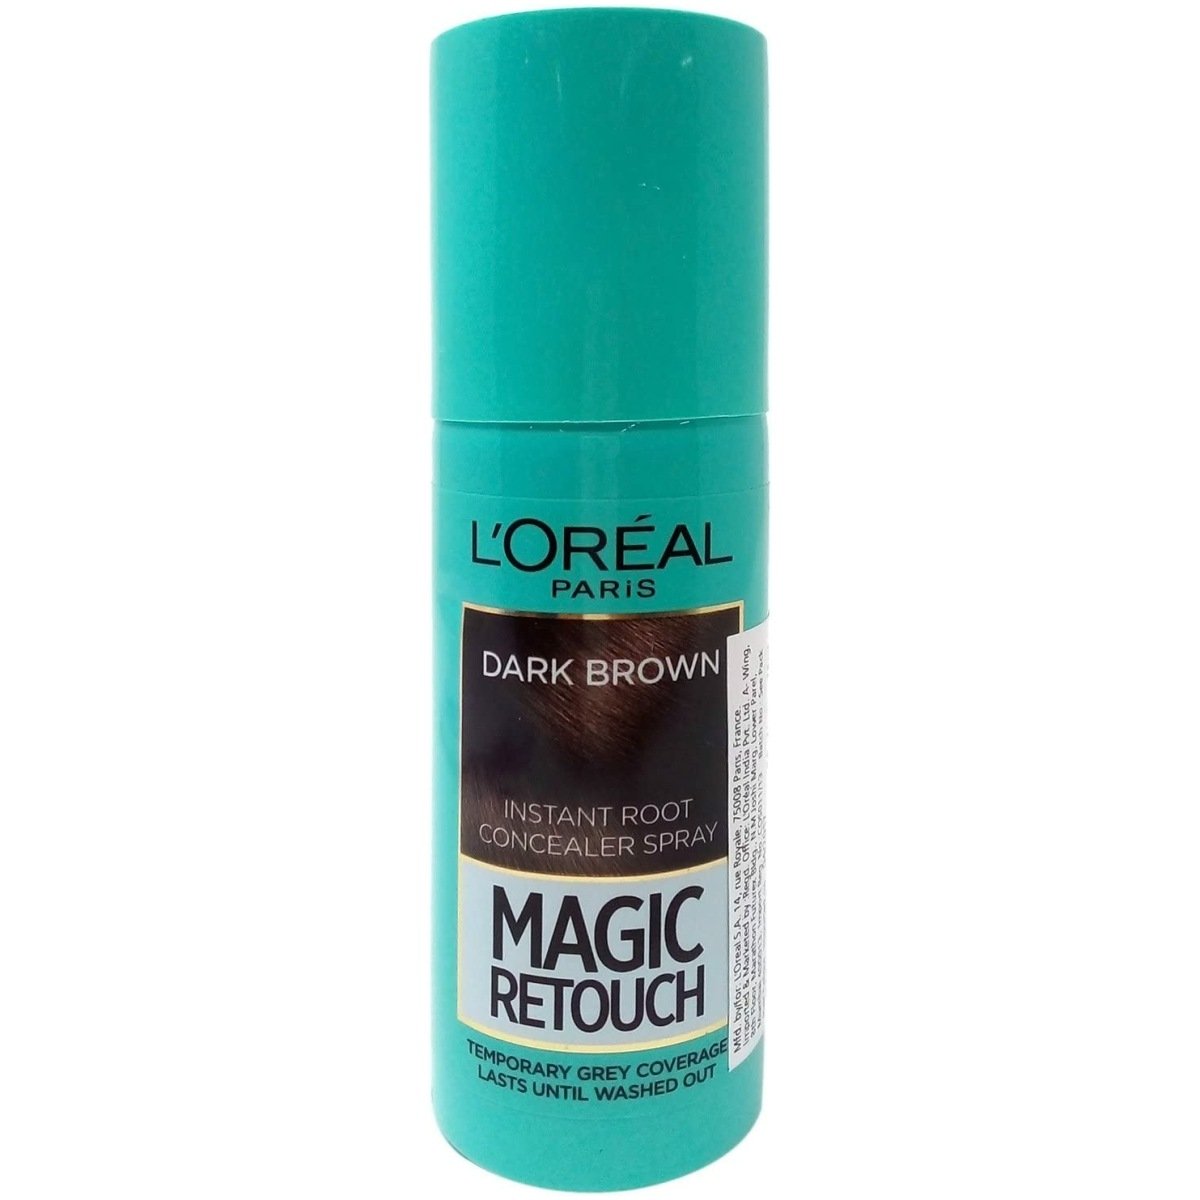 L'Oreal Magic Retouch Concealer Spray